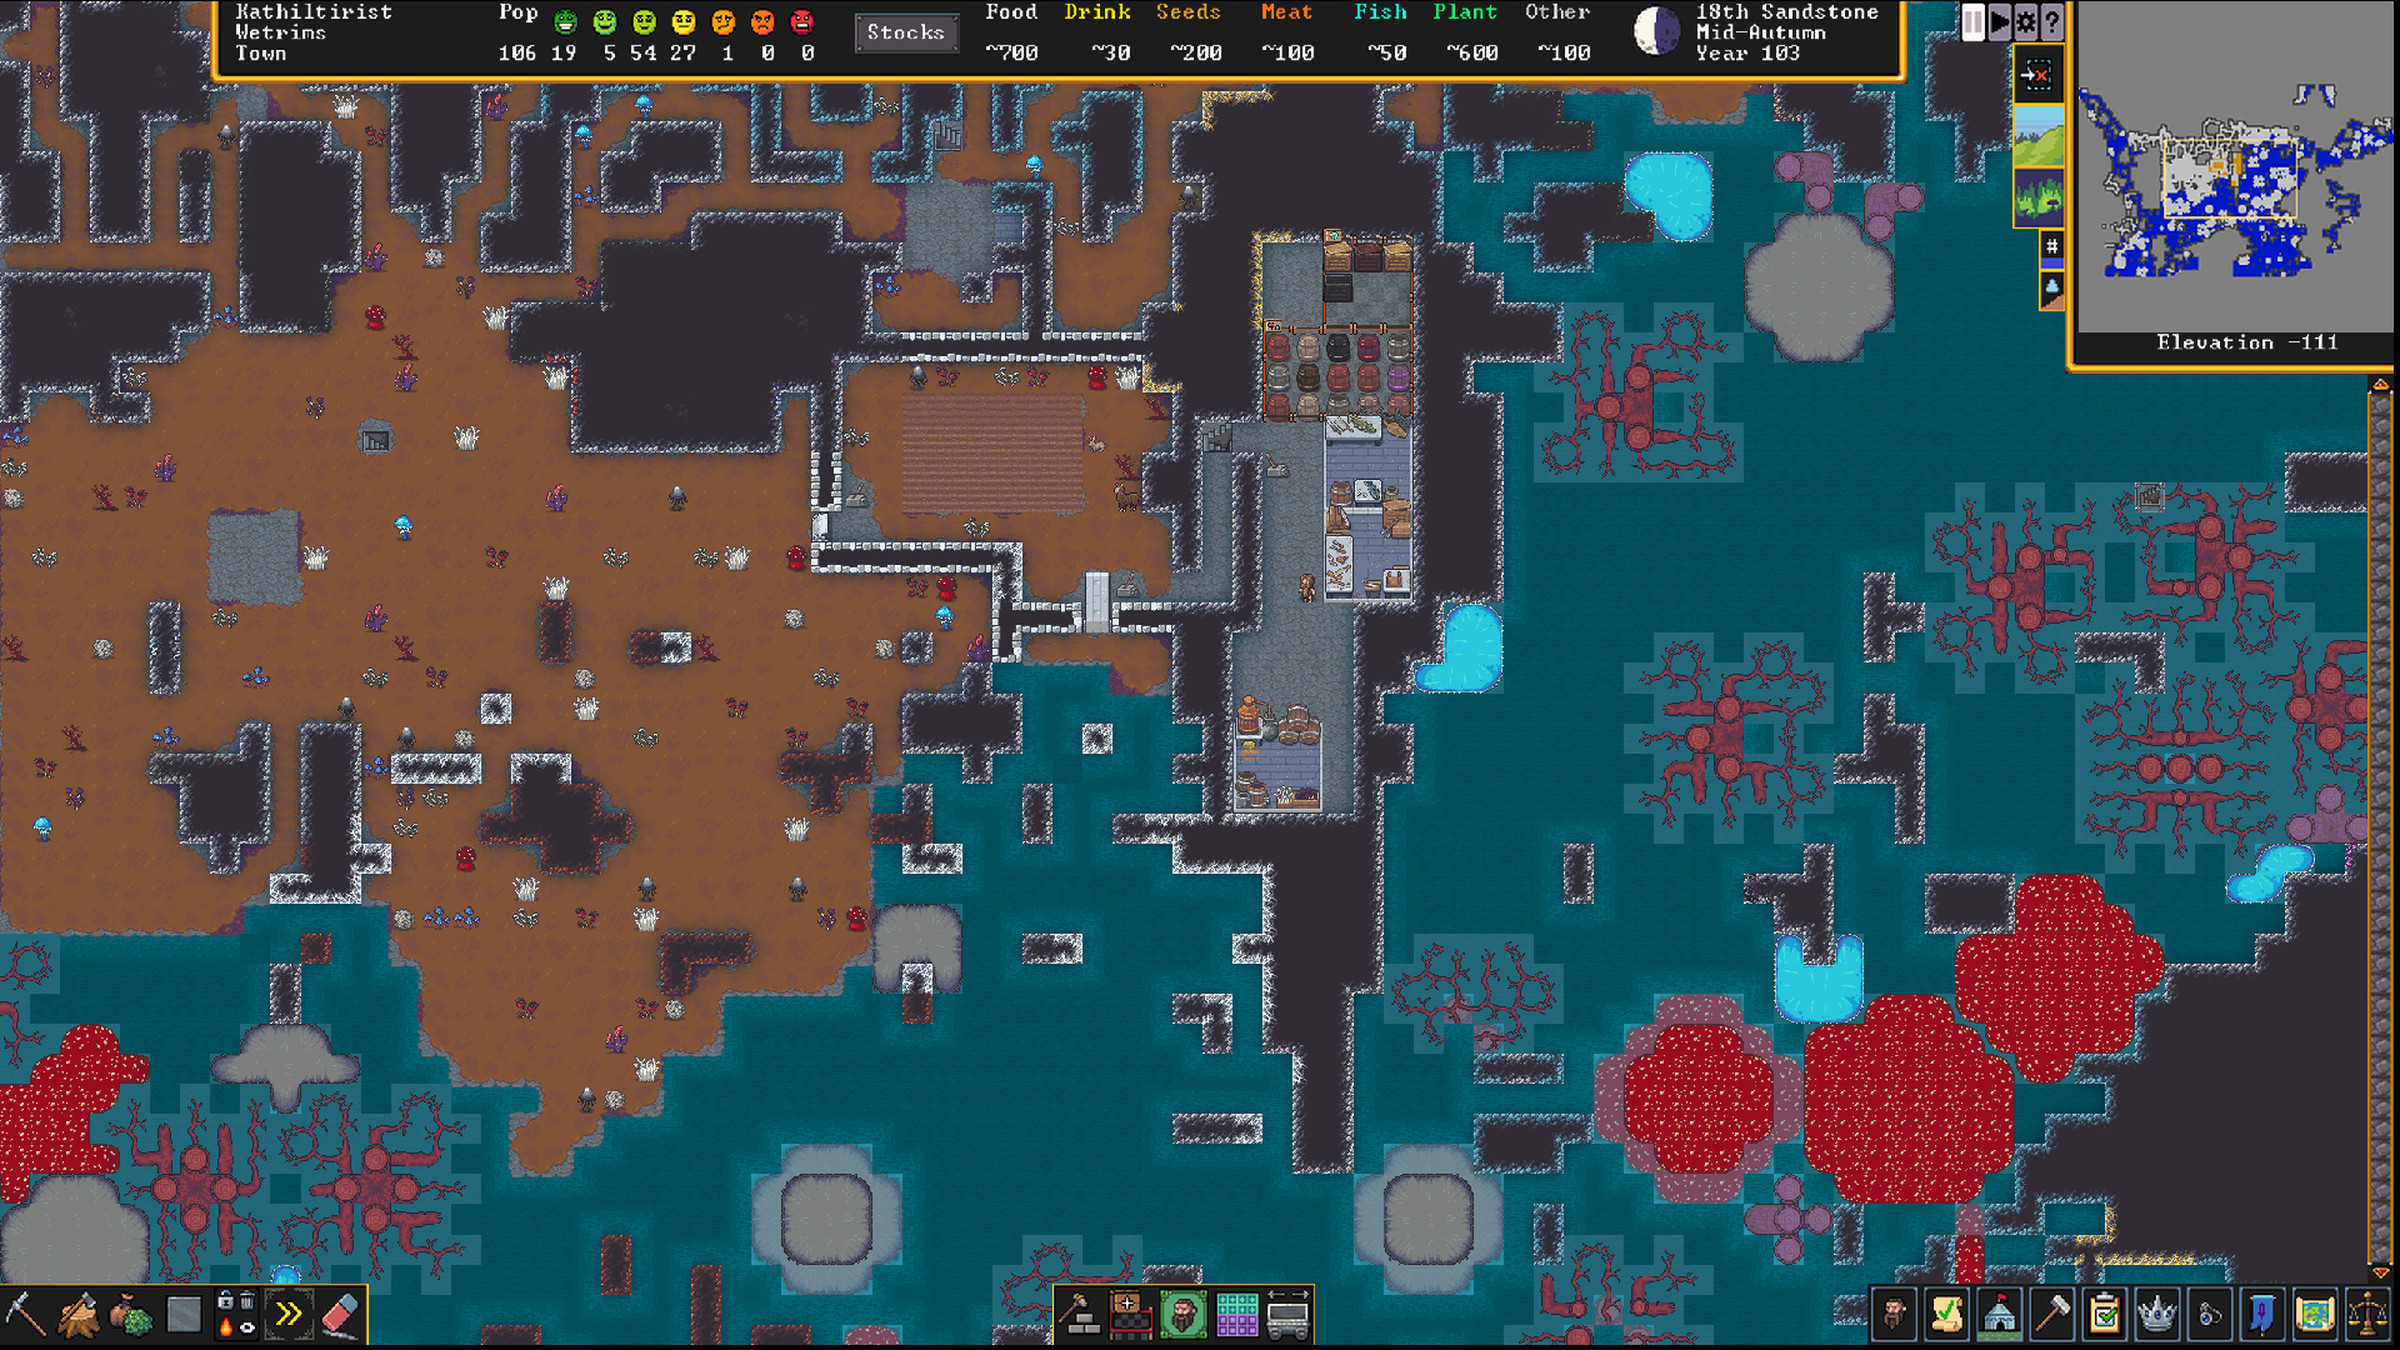 A screenshot from the video game Dwarf Fortress.